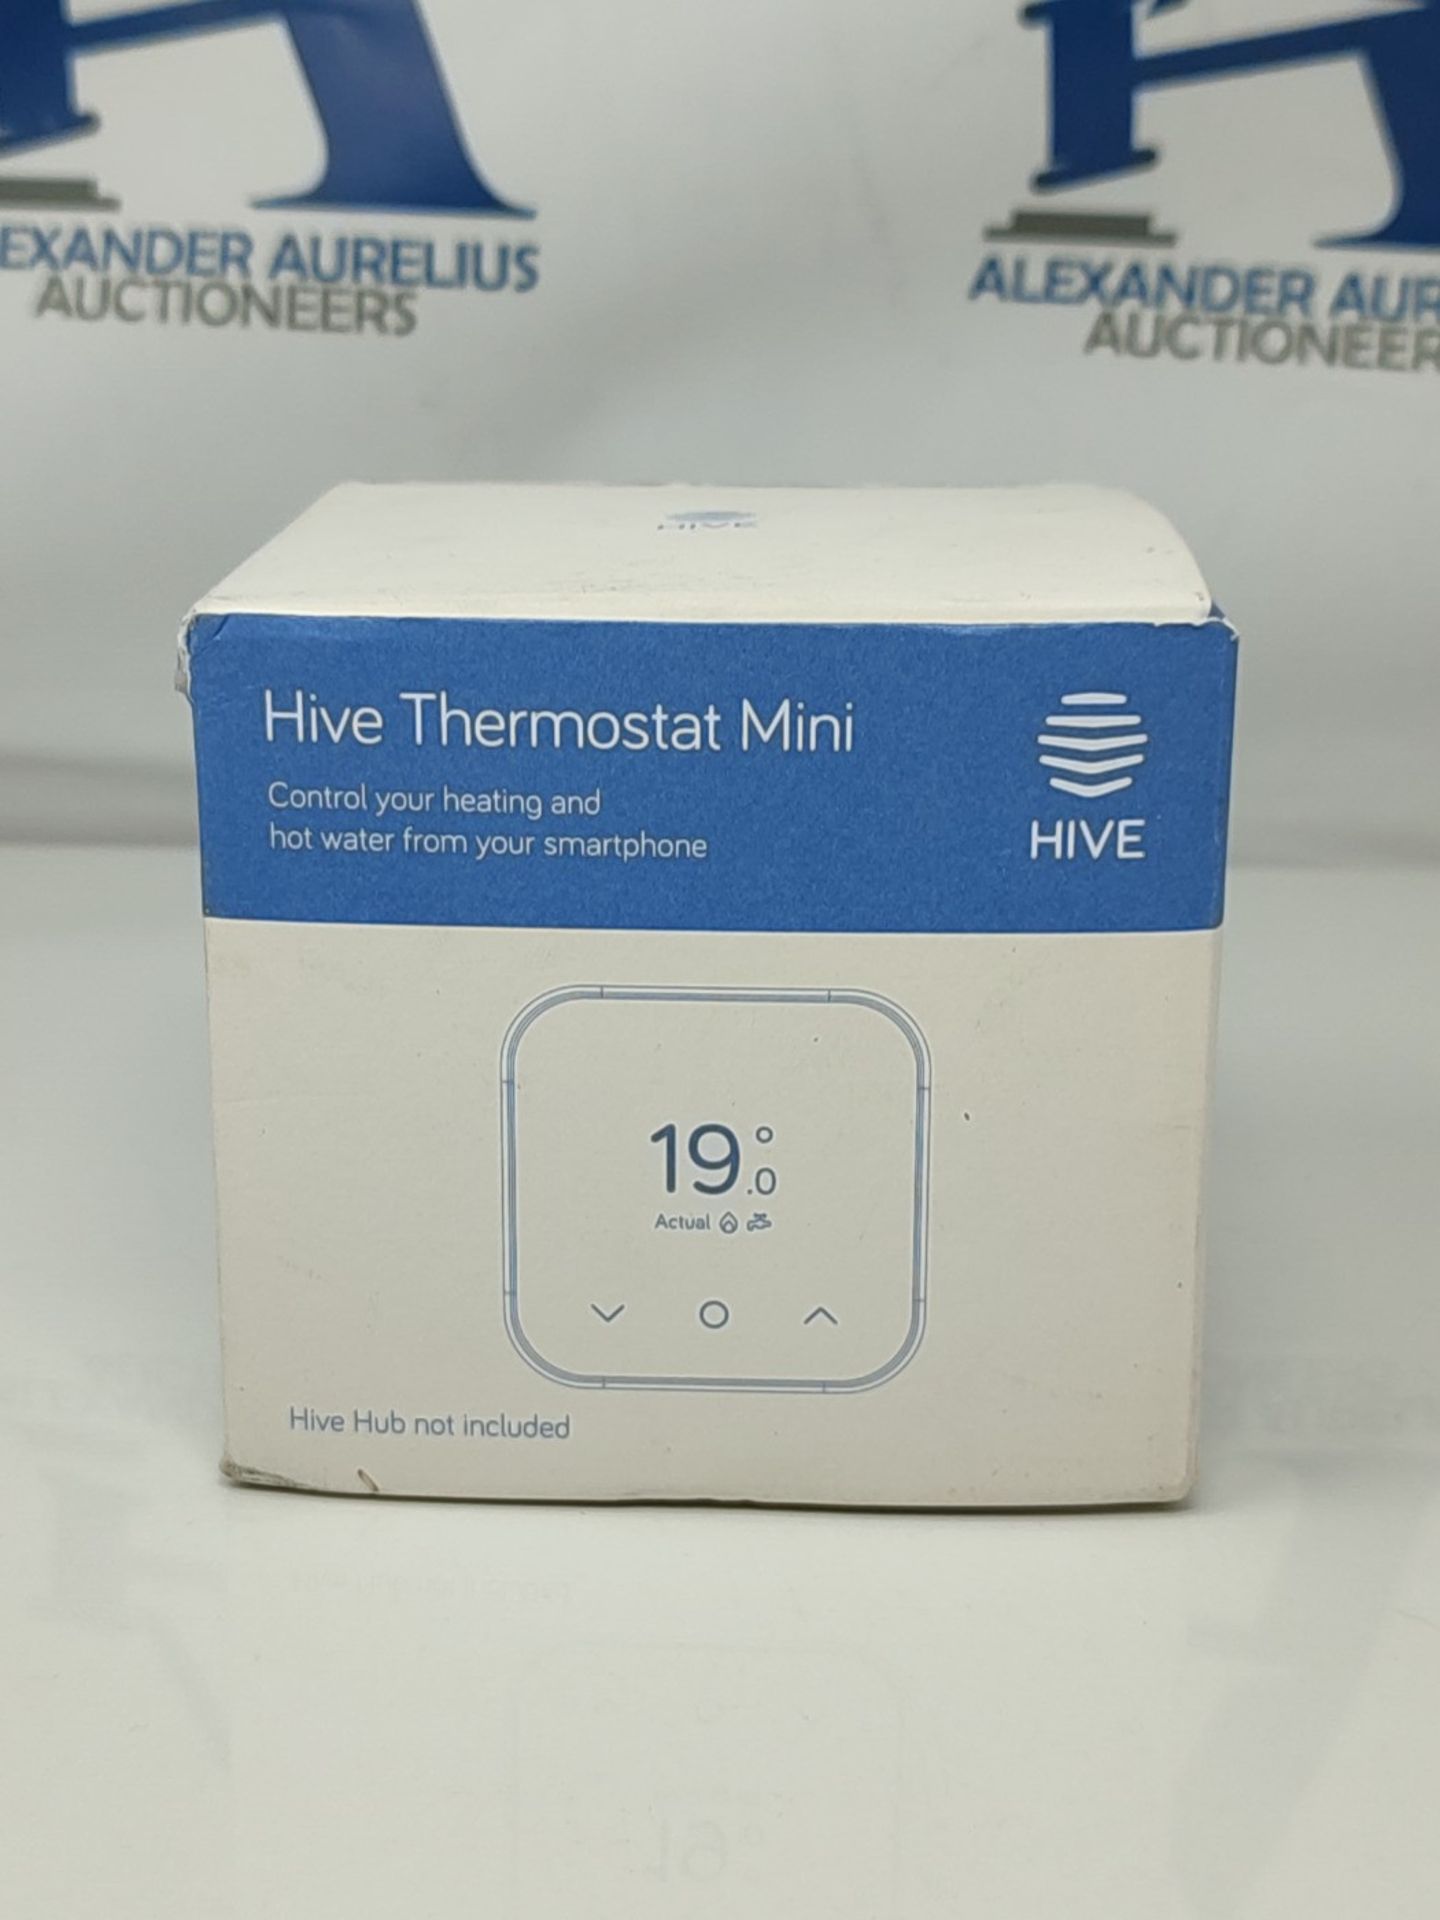 Hive Thermostat Mini for Heating and Hot Water - Hubless - Image 2 of 3